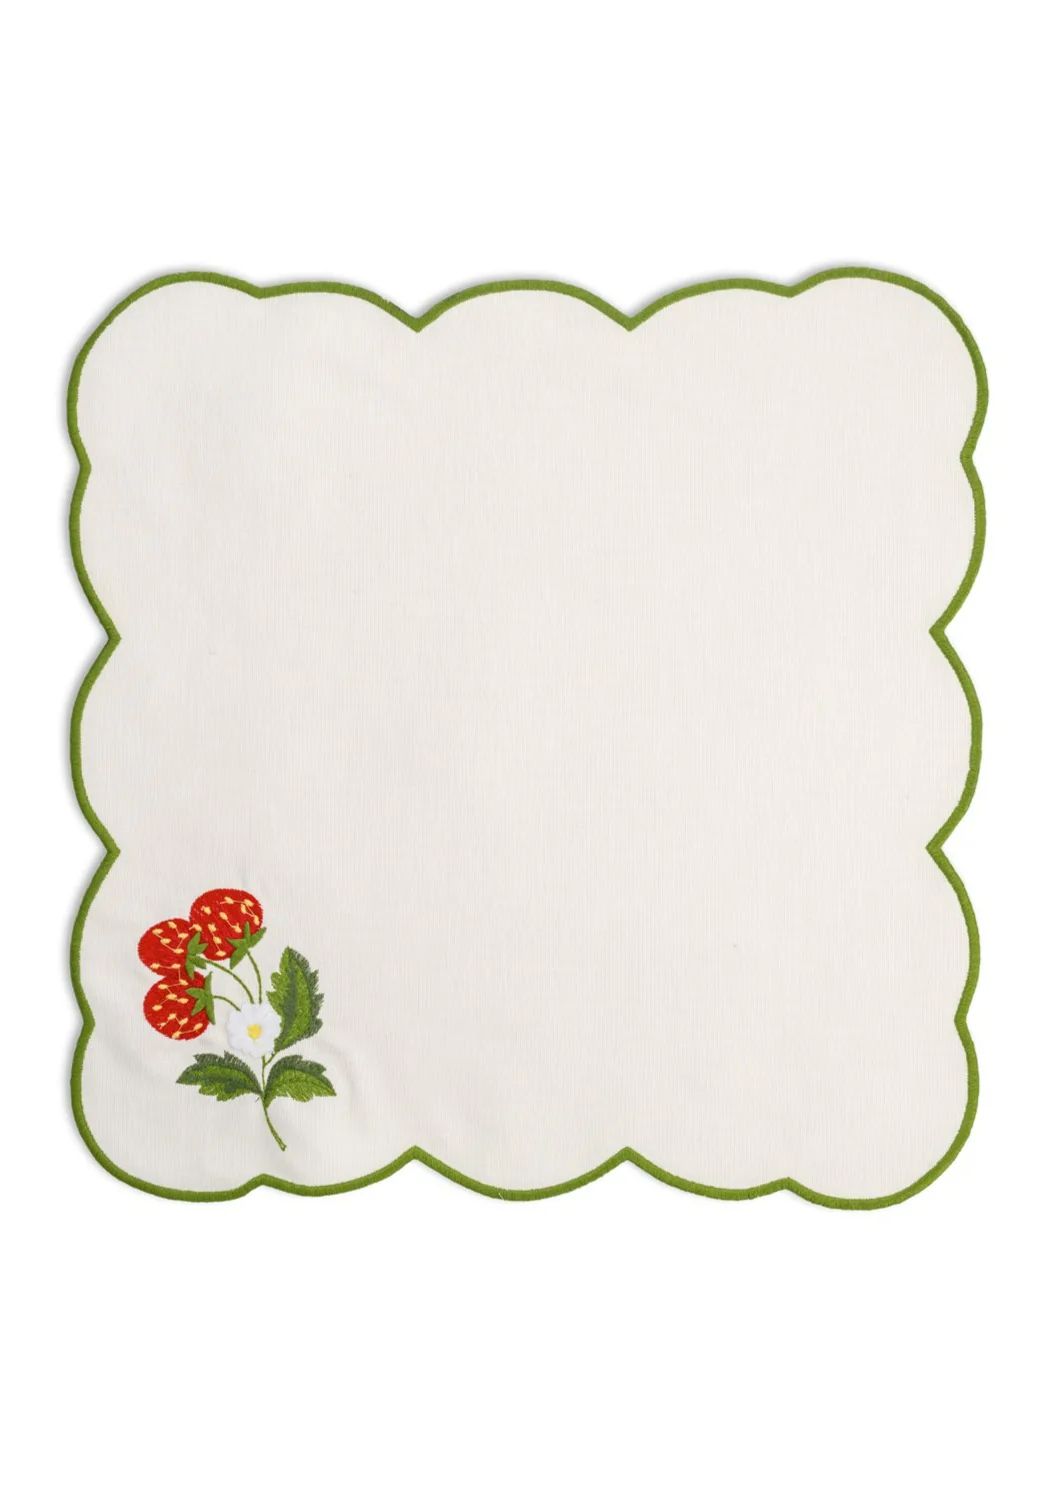 Strawberry Placemat and Napkin Set in Green | Over The Moon